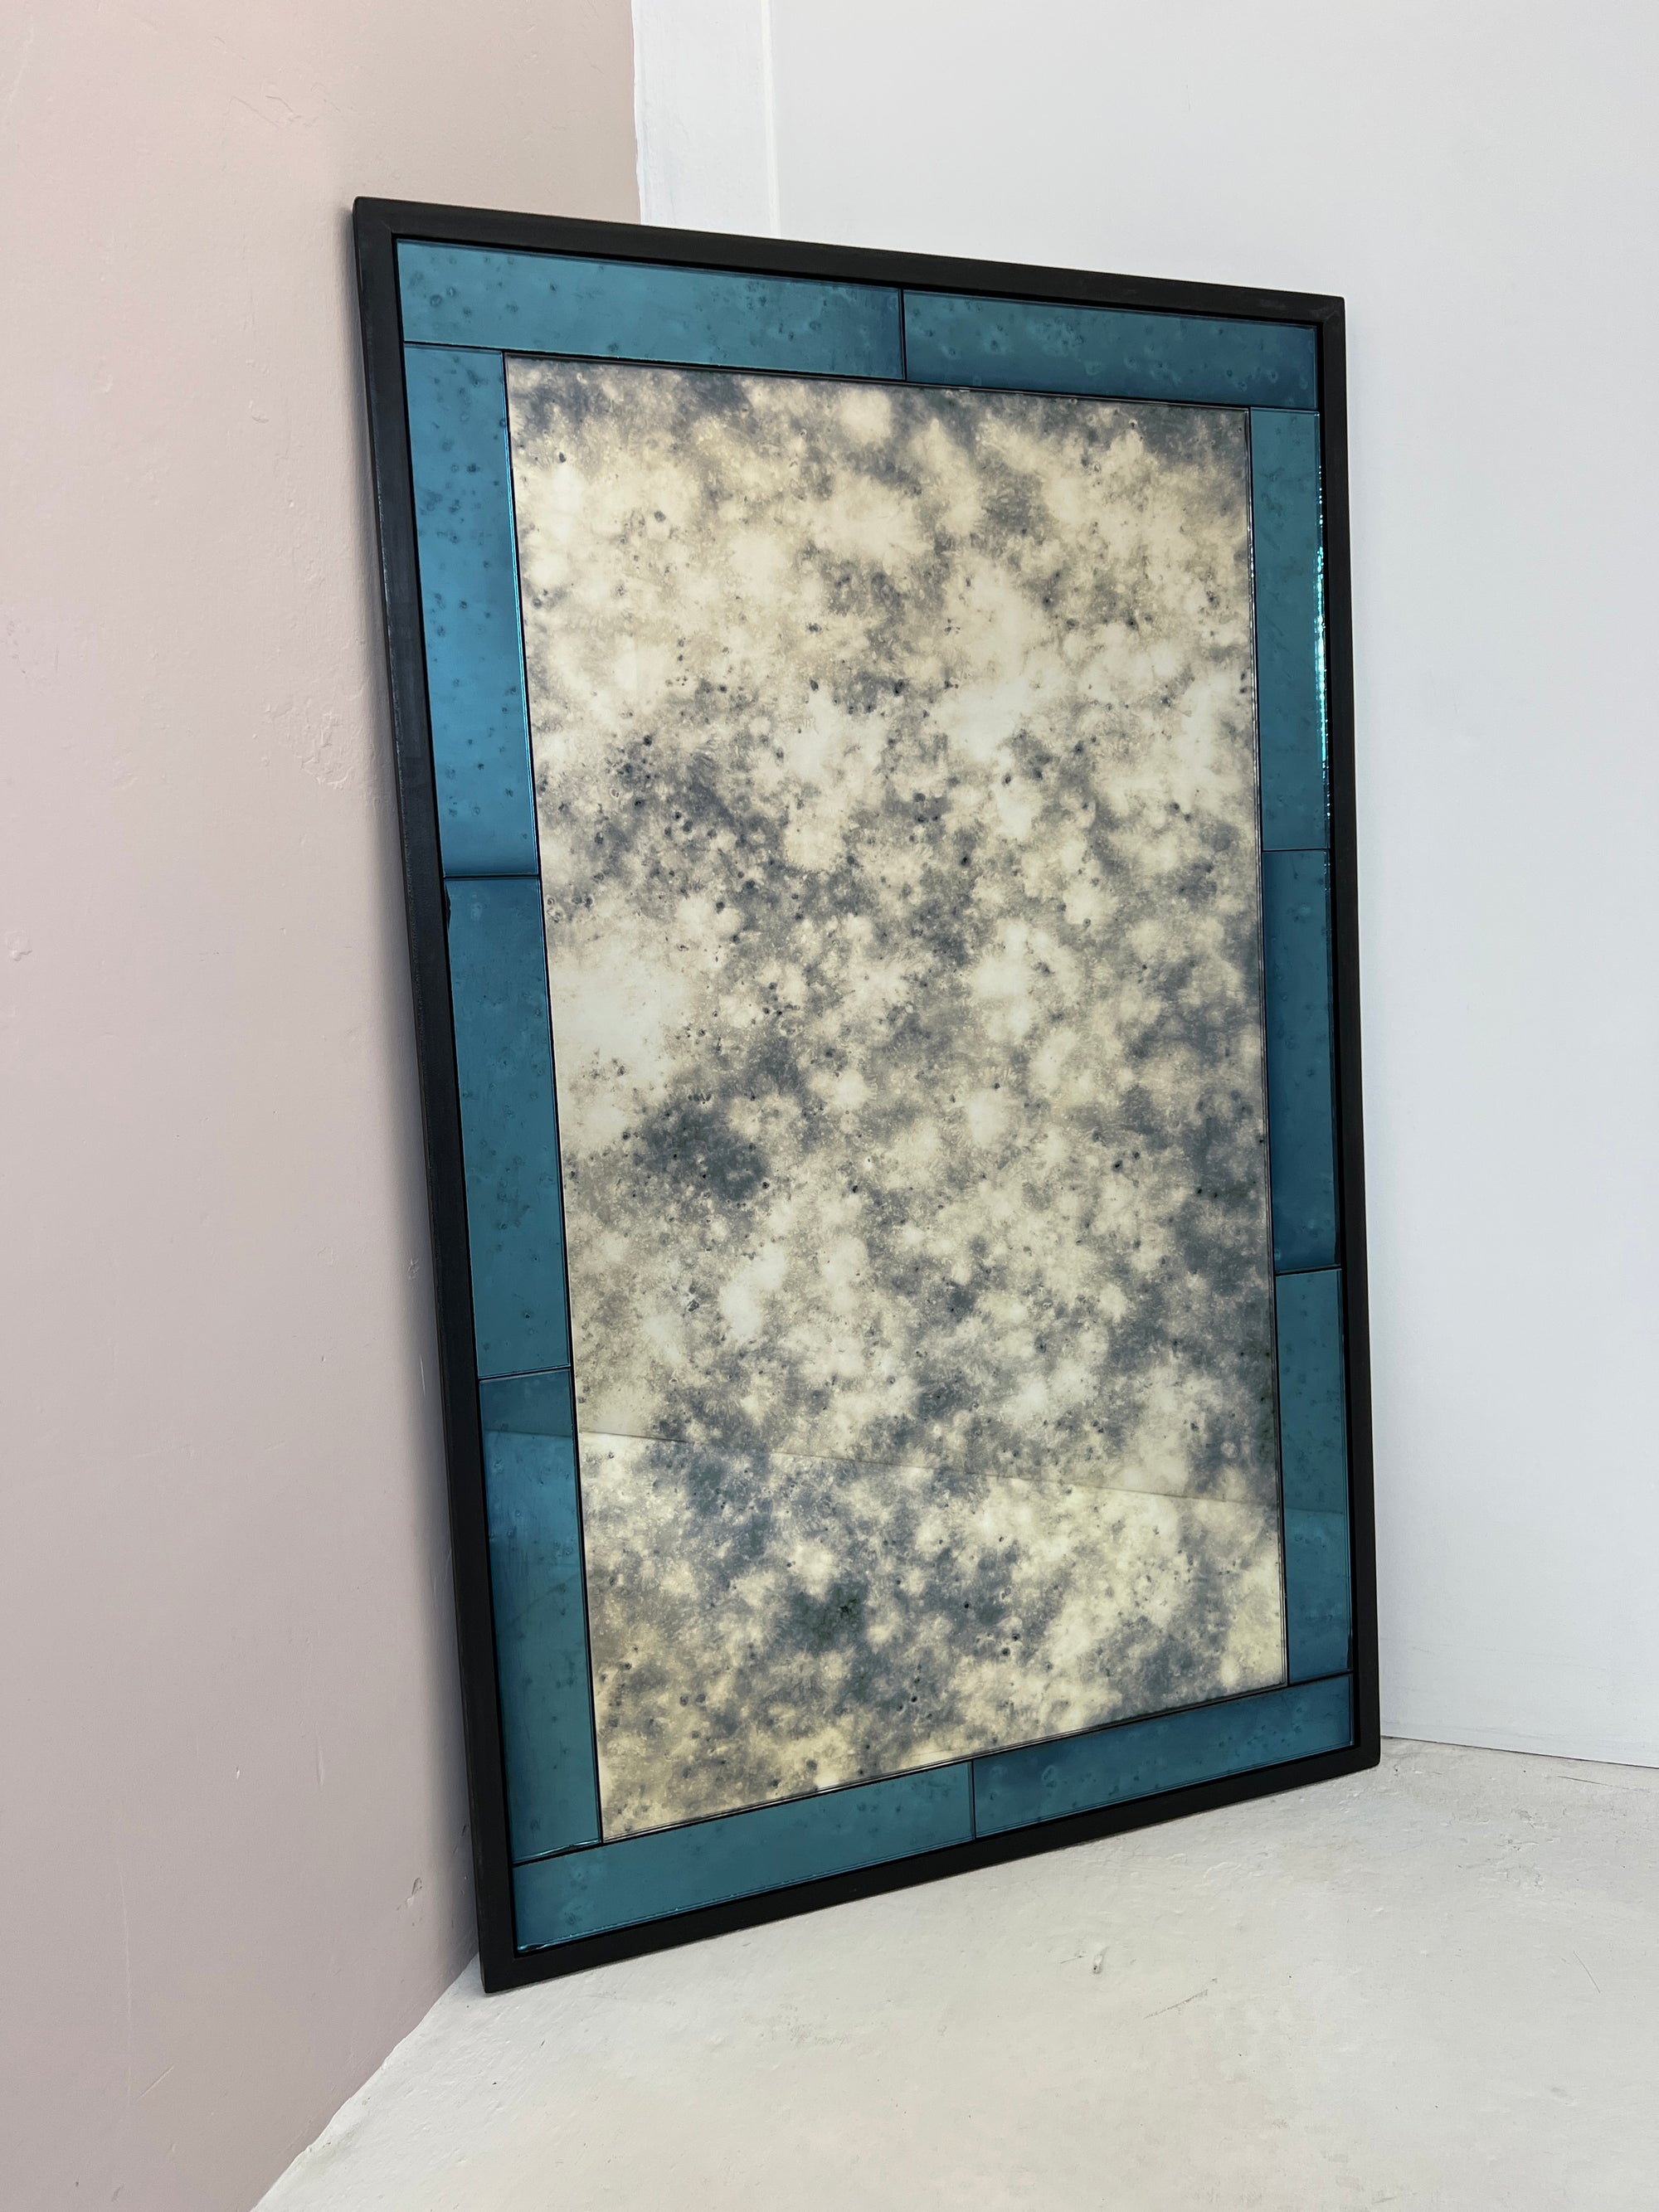 Art Deco inspired Antiqued Mirror with blue mirror border - 720 x 1155mm